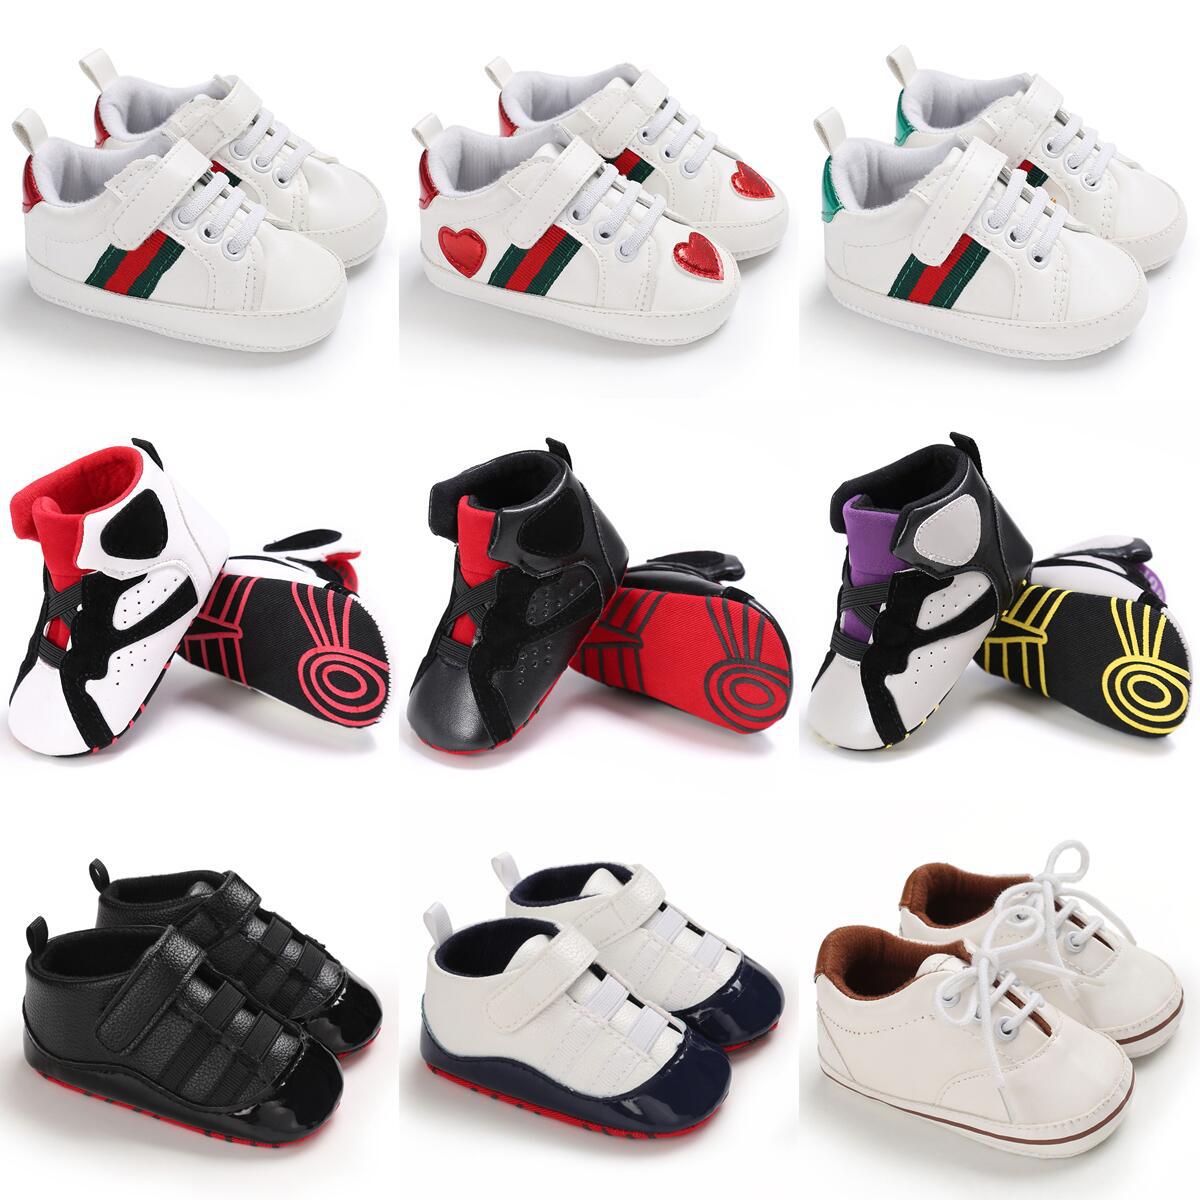 New Spring and Autumn Boys and Girls Baby Comfortable High-Top Baby Sneaker 0-12 Months Baby Toddler Shoes Soft Sole Shoes